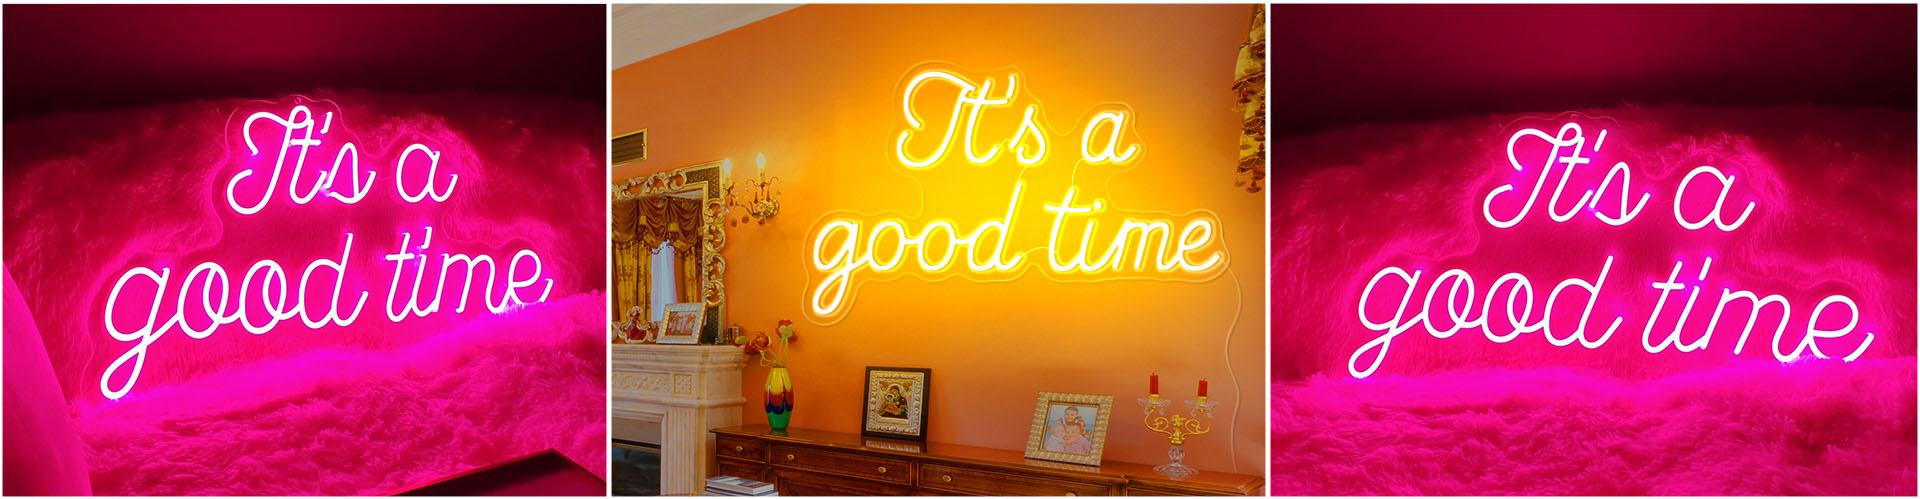 it's a good time neon light sign